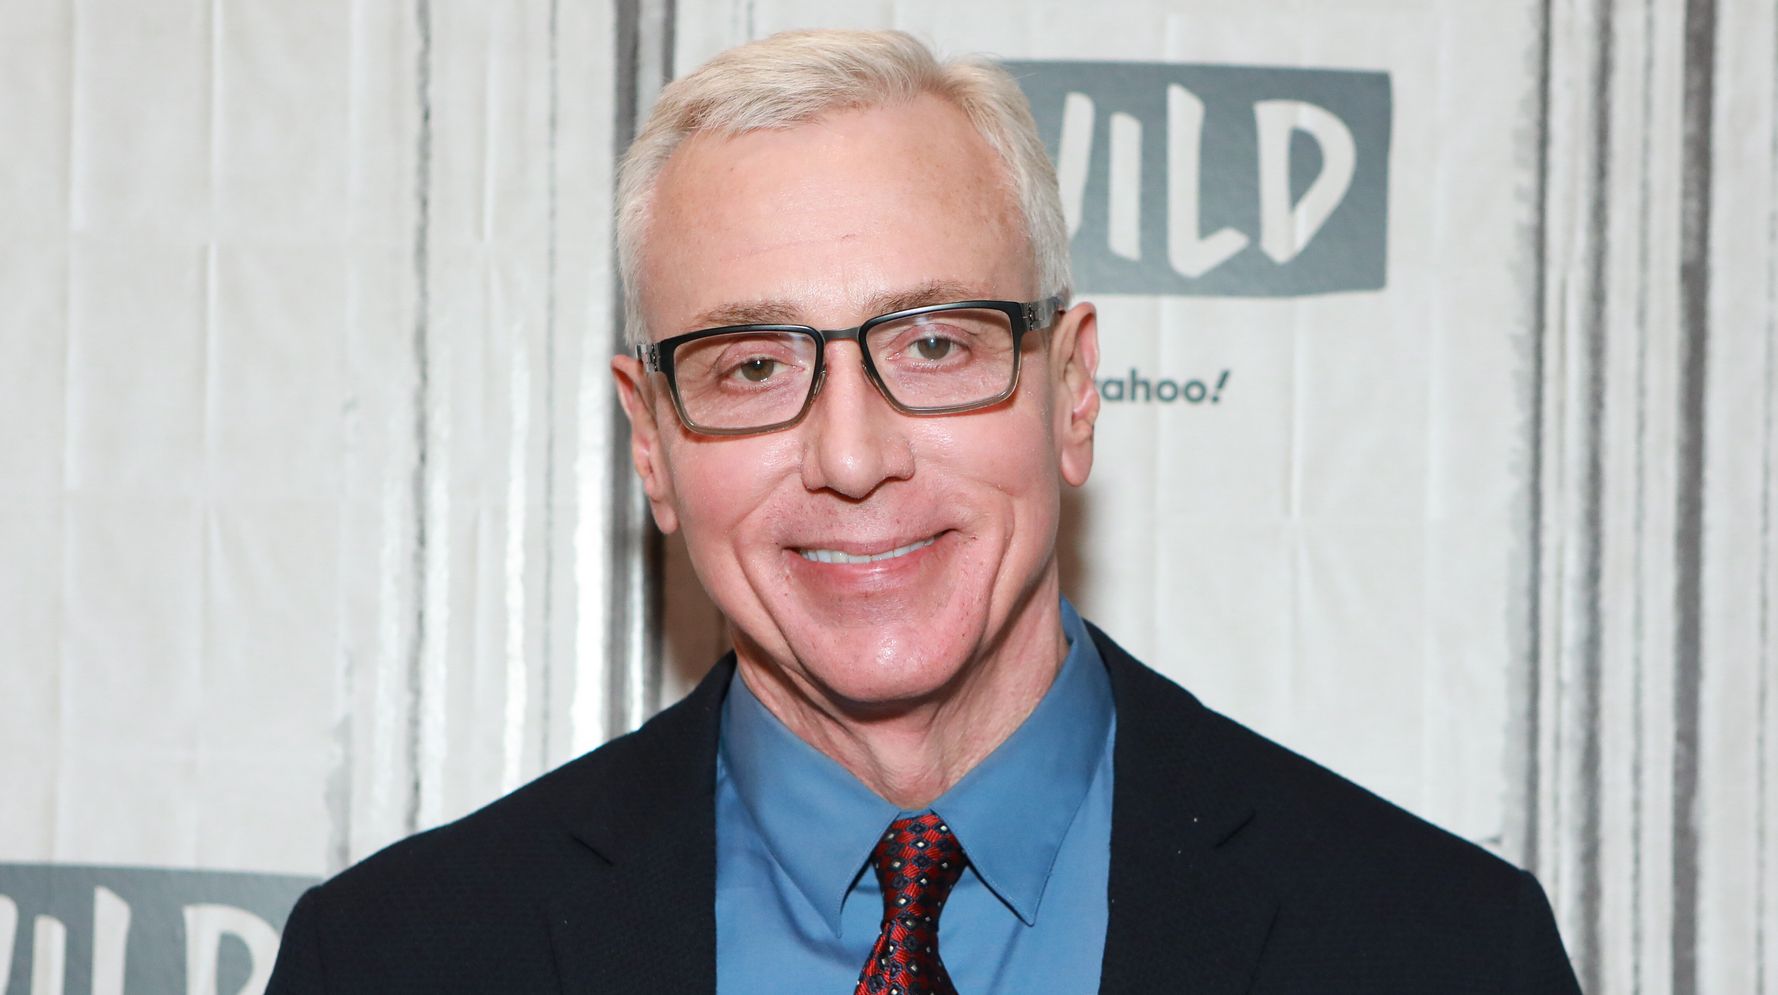 Dr. Drew denounces vaccine passports and is dragged by Twitter users